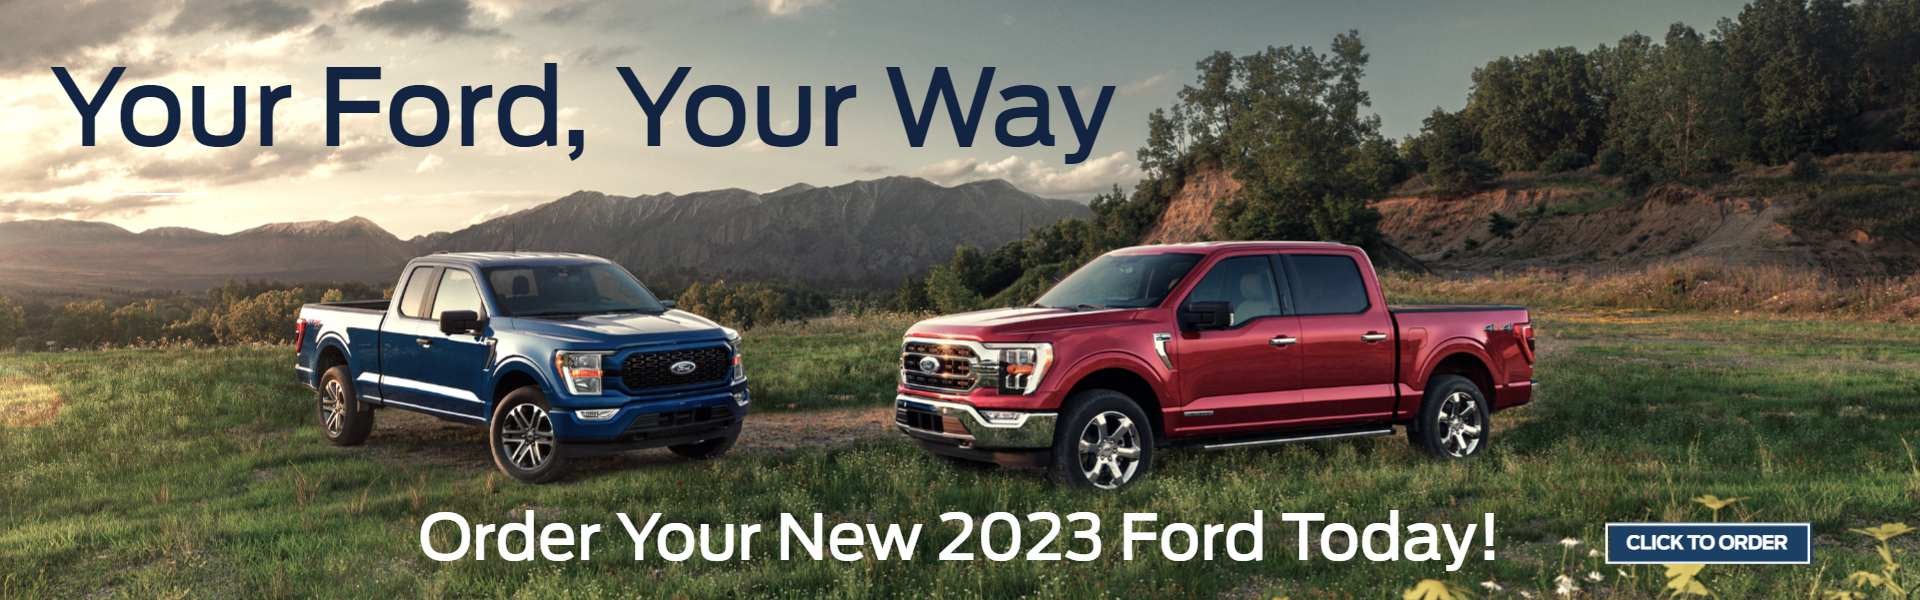 Order Your New 2023 Ford Today 